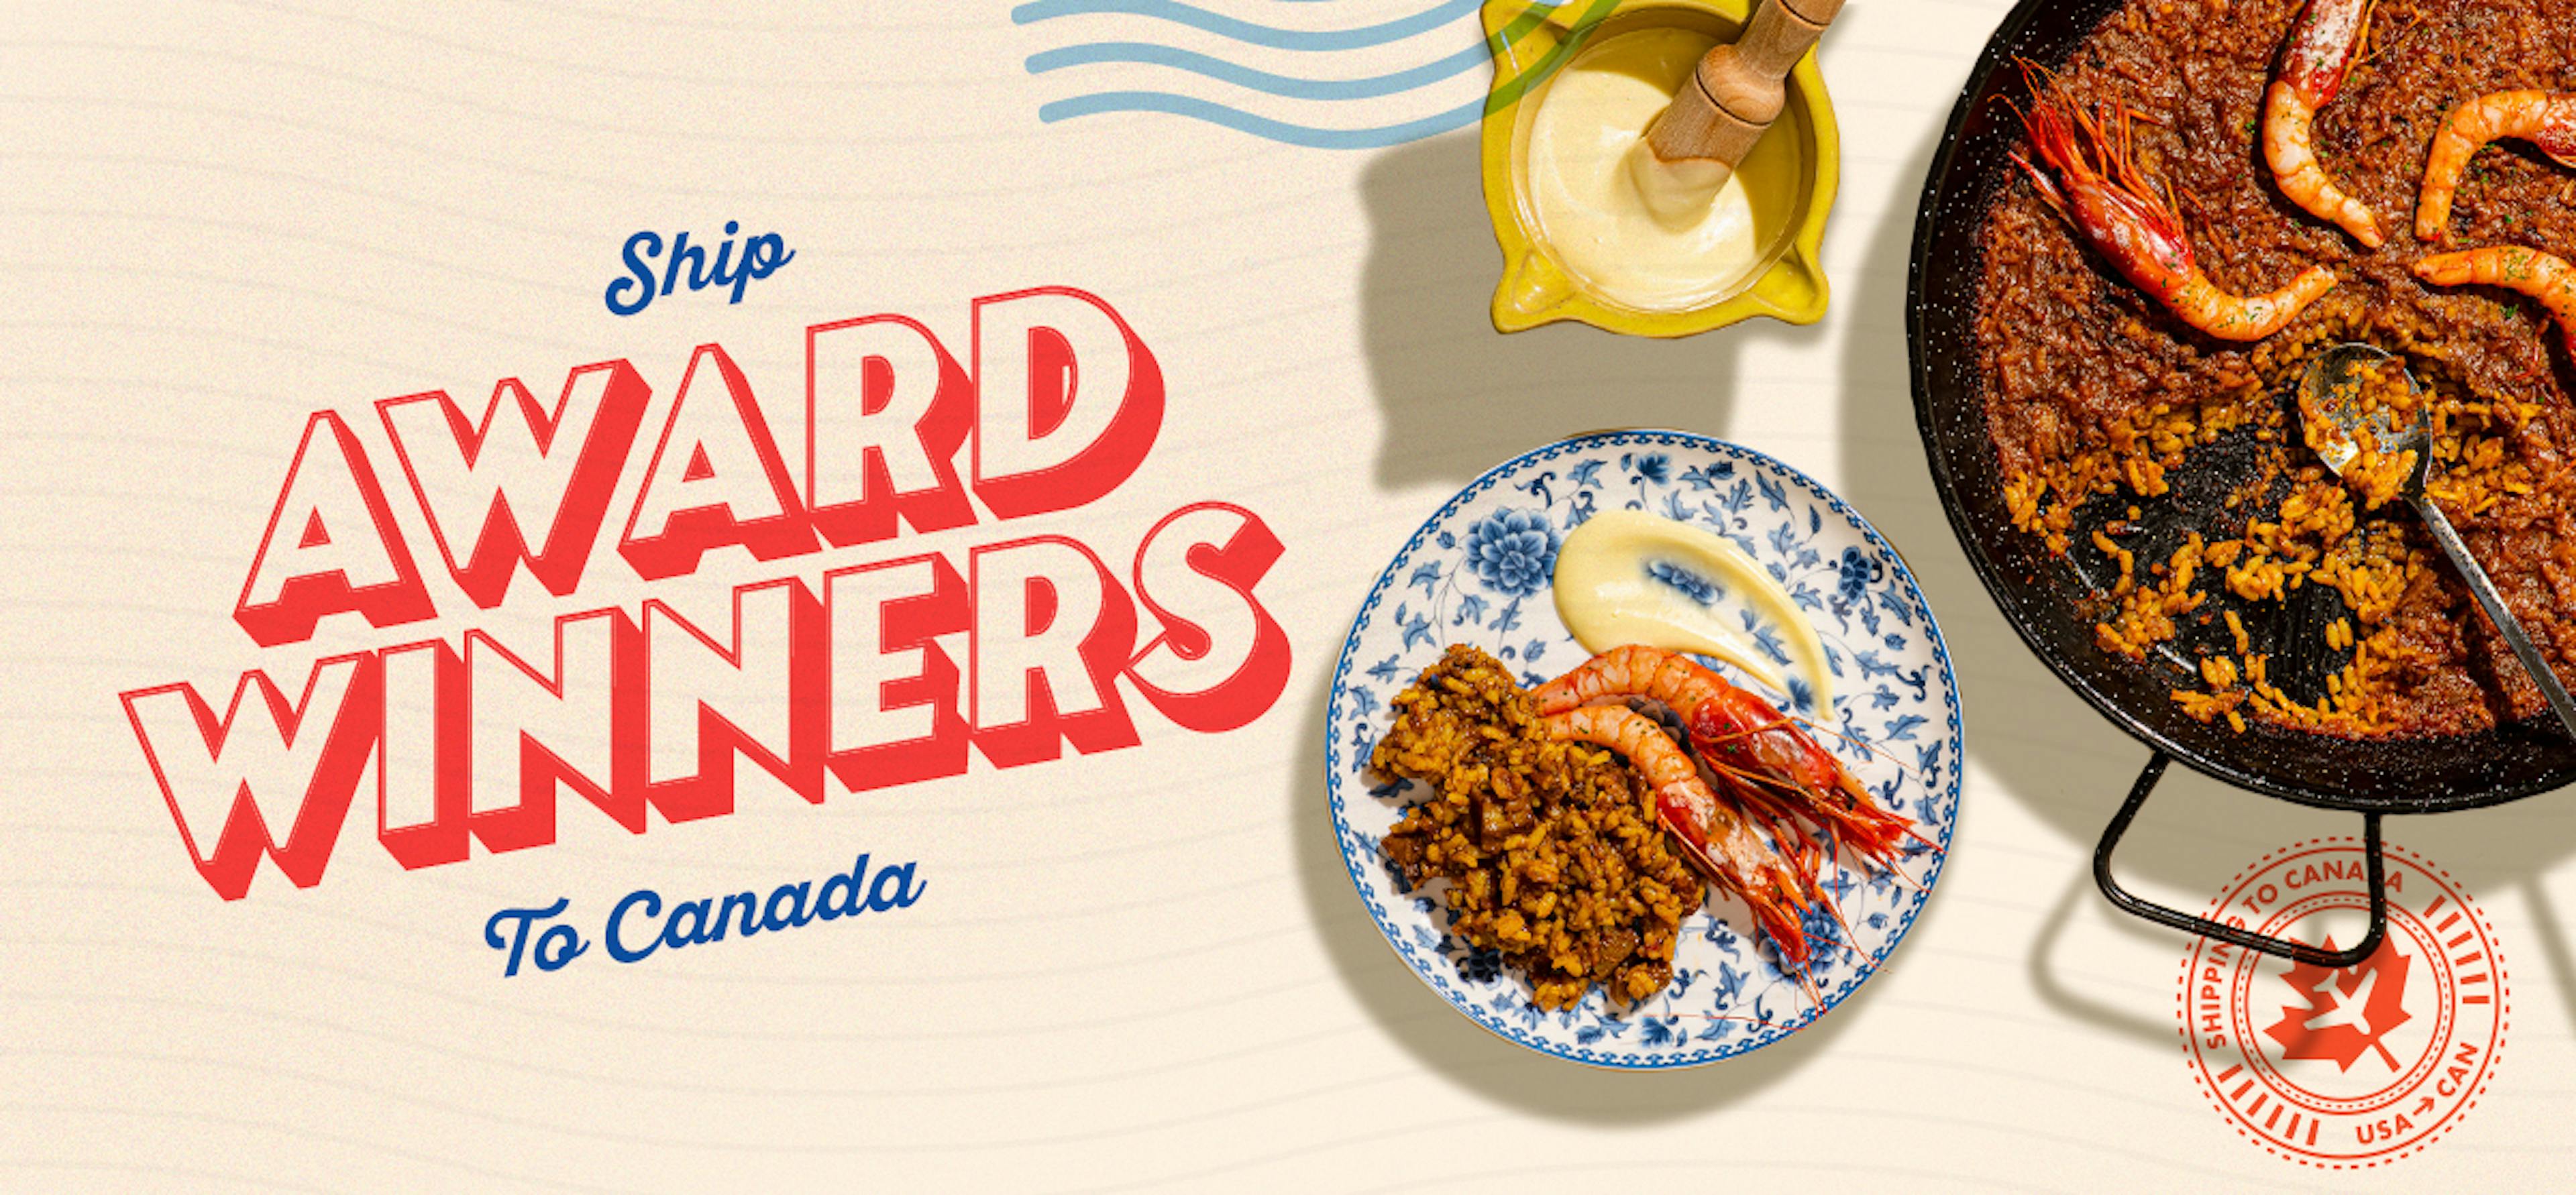 Award-Winning Foods that Ship to Canada